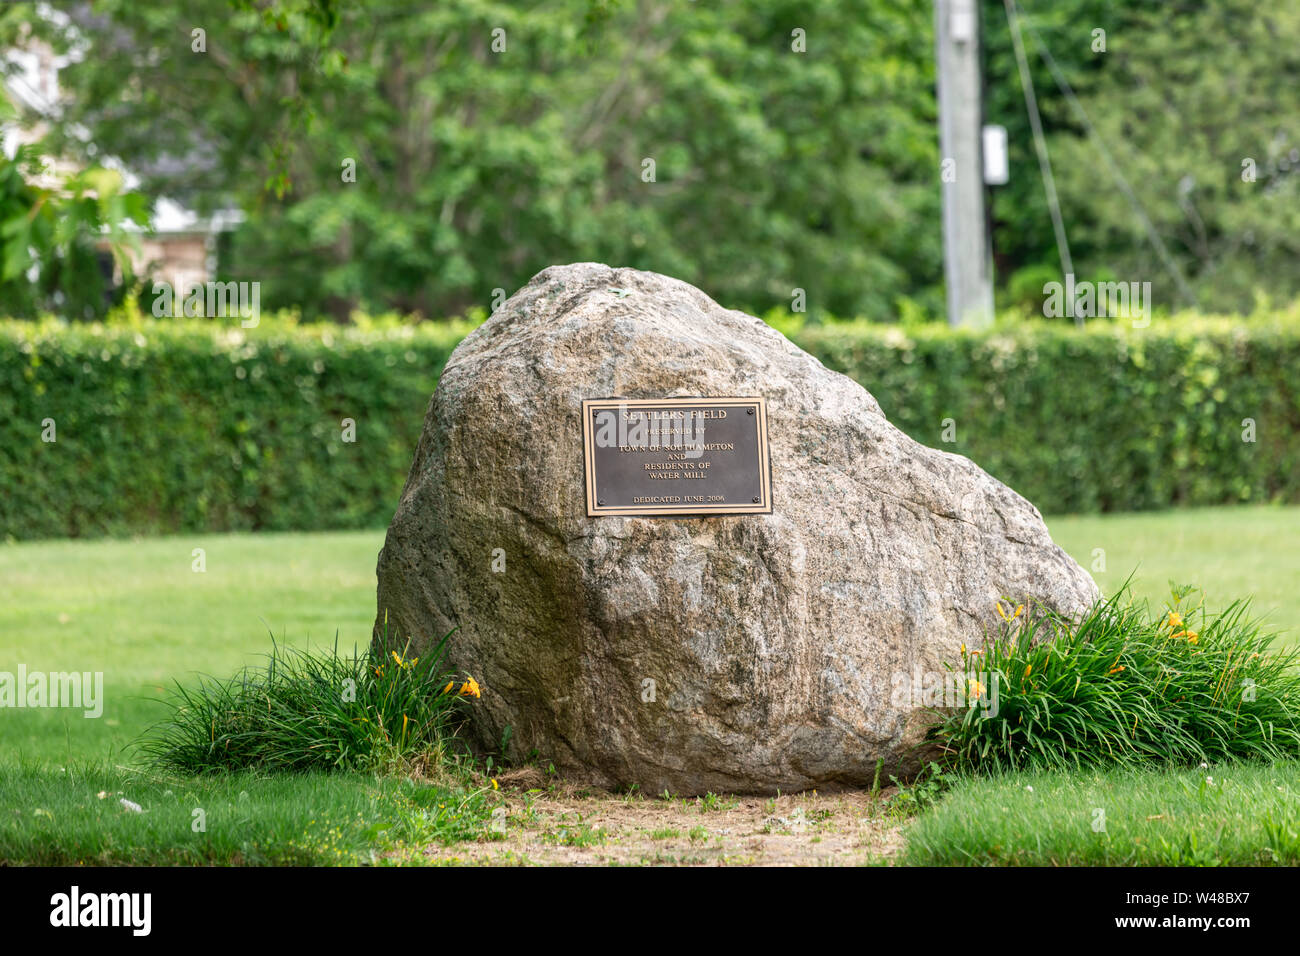 Plaque on a large rock in Water Mill, NY Stock Photo